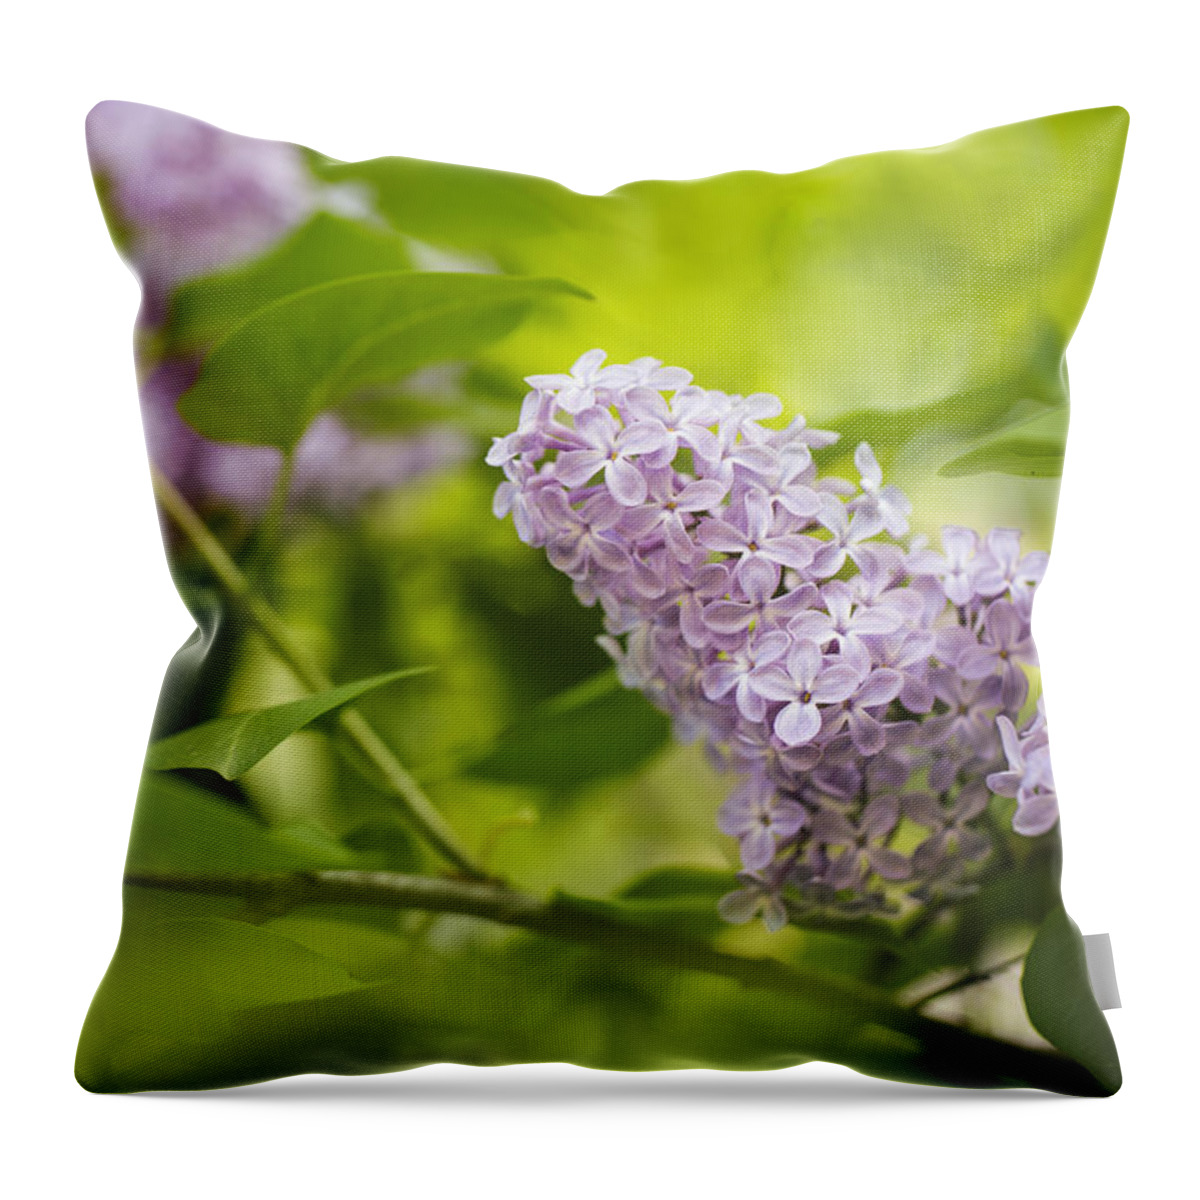 Lilac Throw Pillow featuring the photograph Purple Lilac by Nailia Schwarz